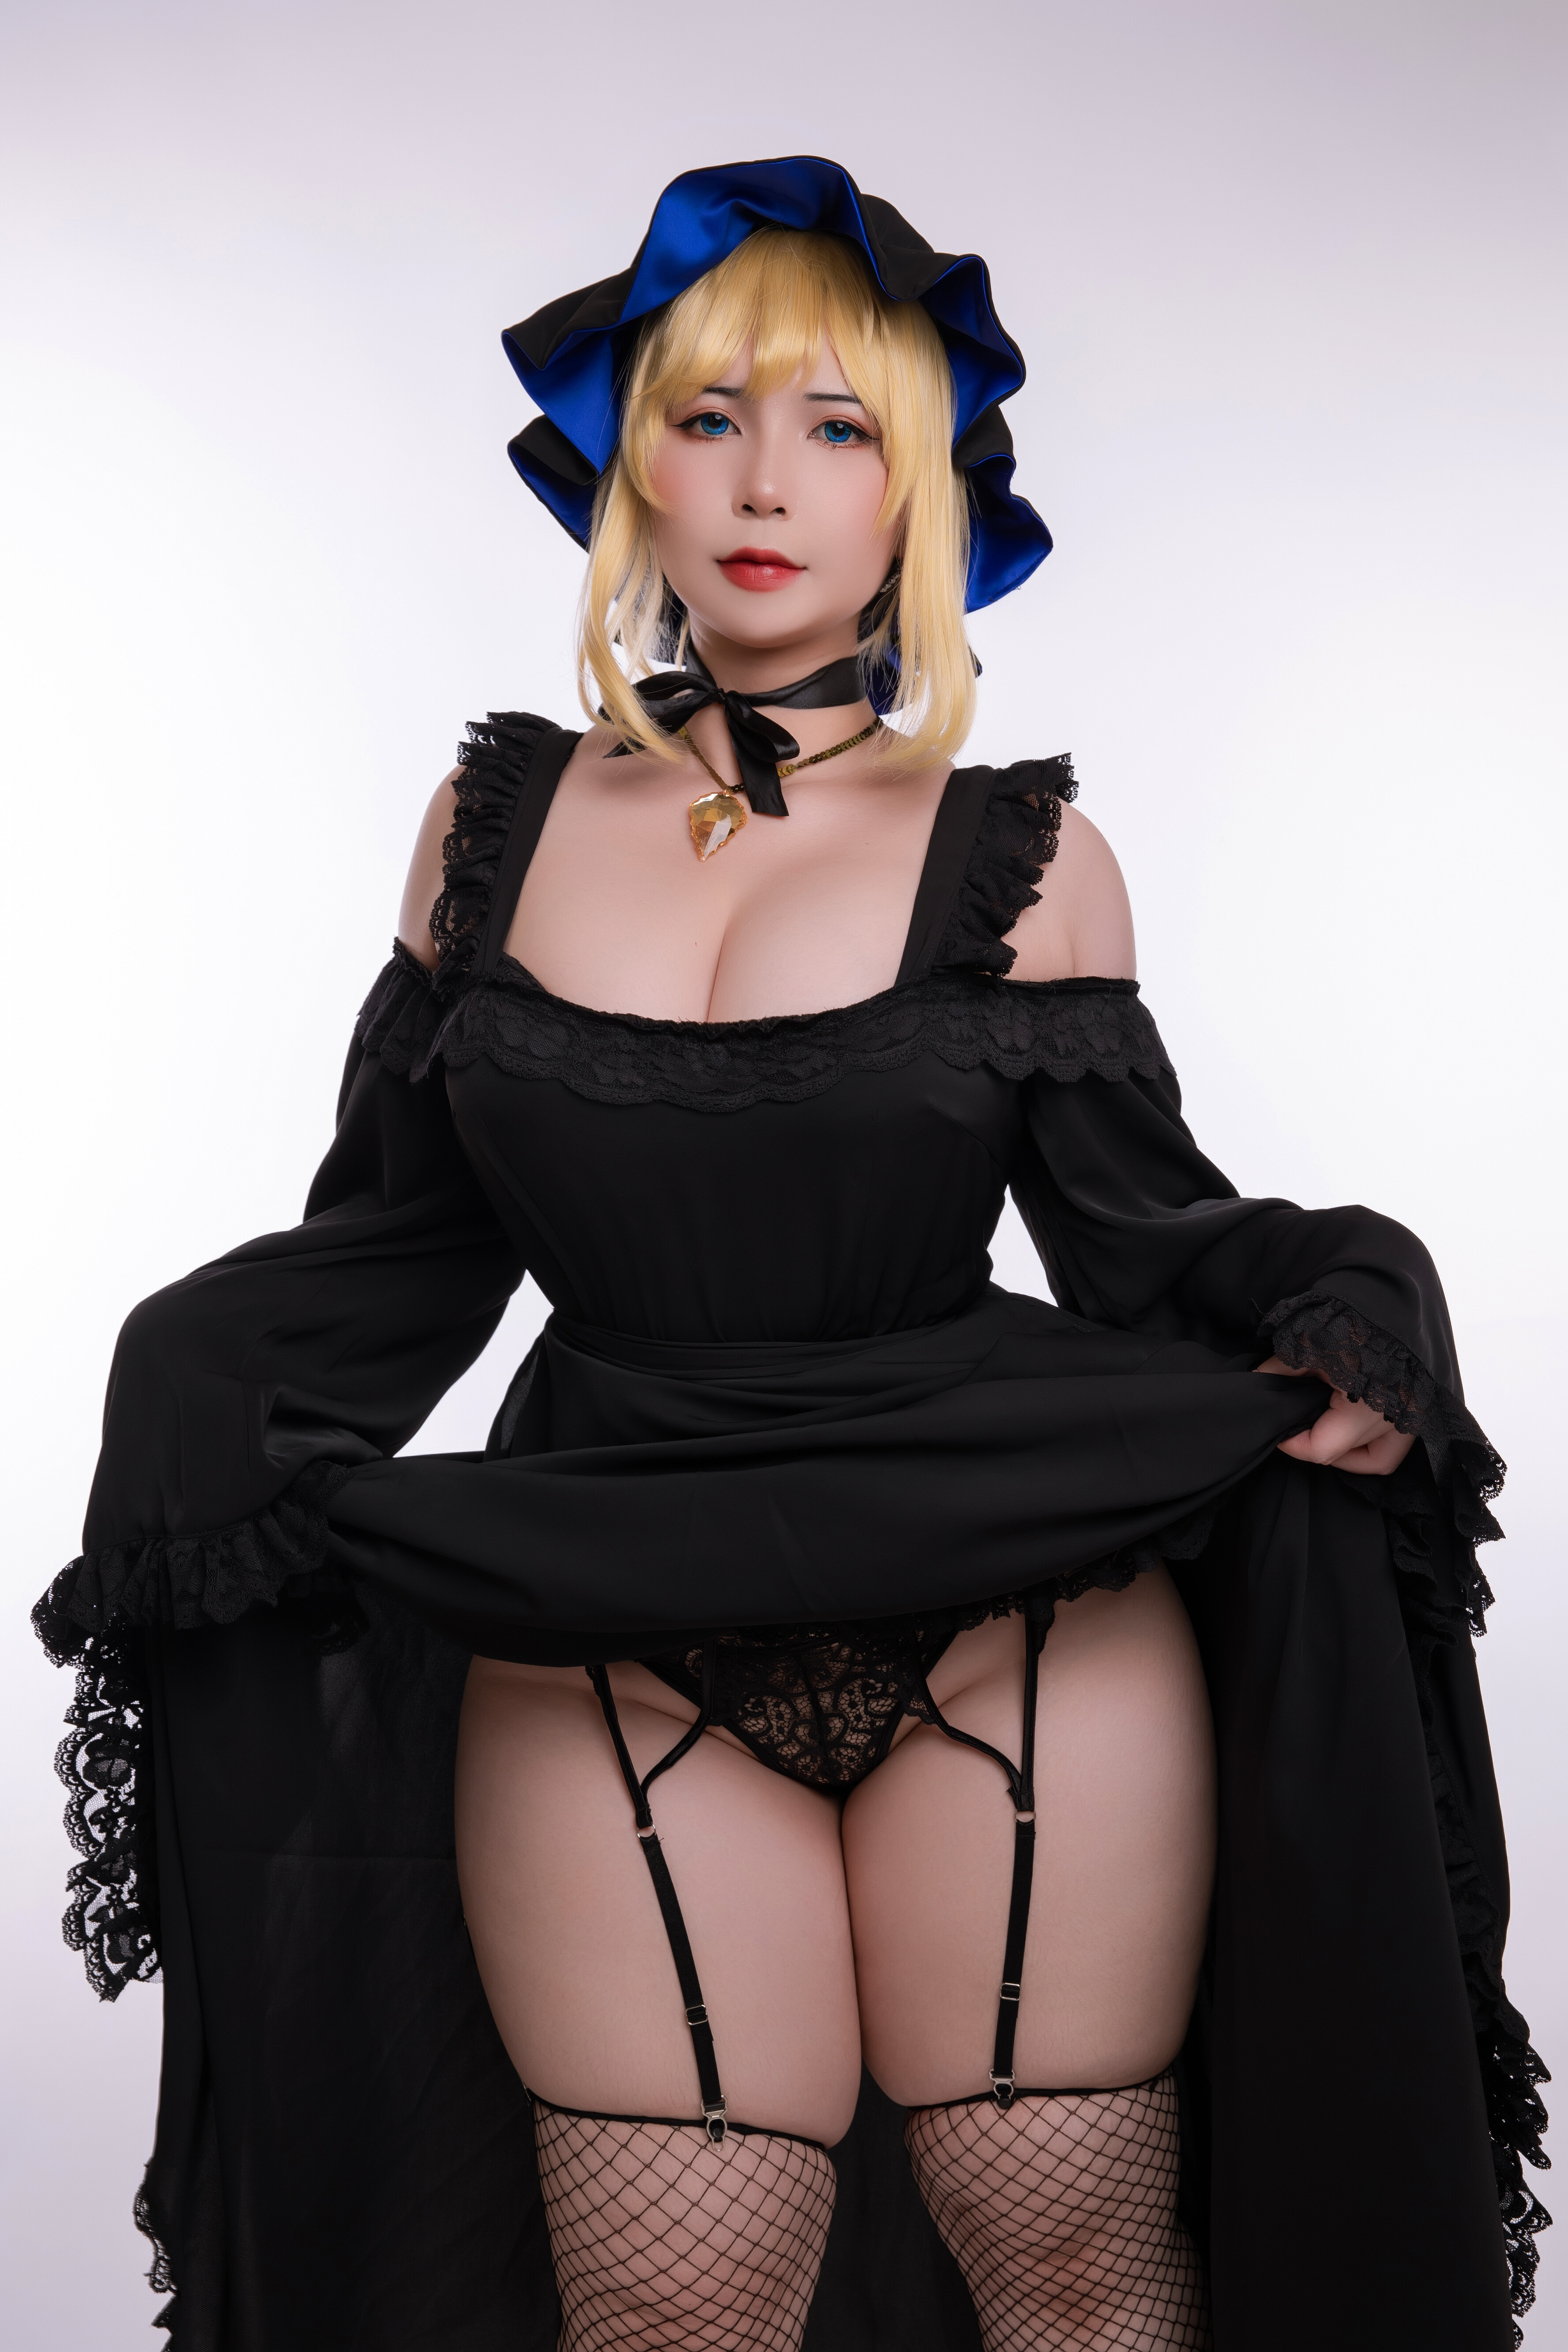 People 3553x5330 Alice Lendrott Shinigami Bocchan to Kuro Maid Uy Uy women model Asian curvy cosplay maid maid outfit studio women indoors lifting dress lifting clothes lingerie panties garter straps stockings fishnet stockings thick thigh